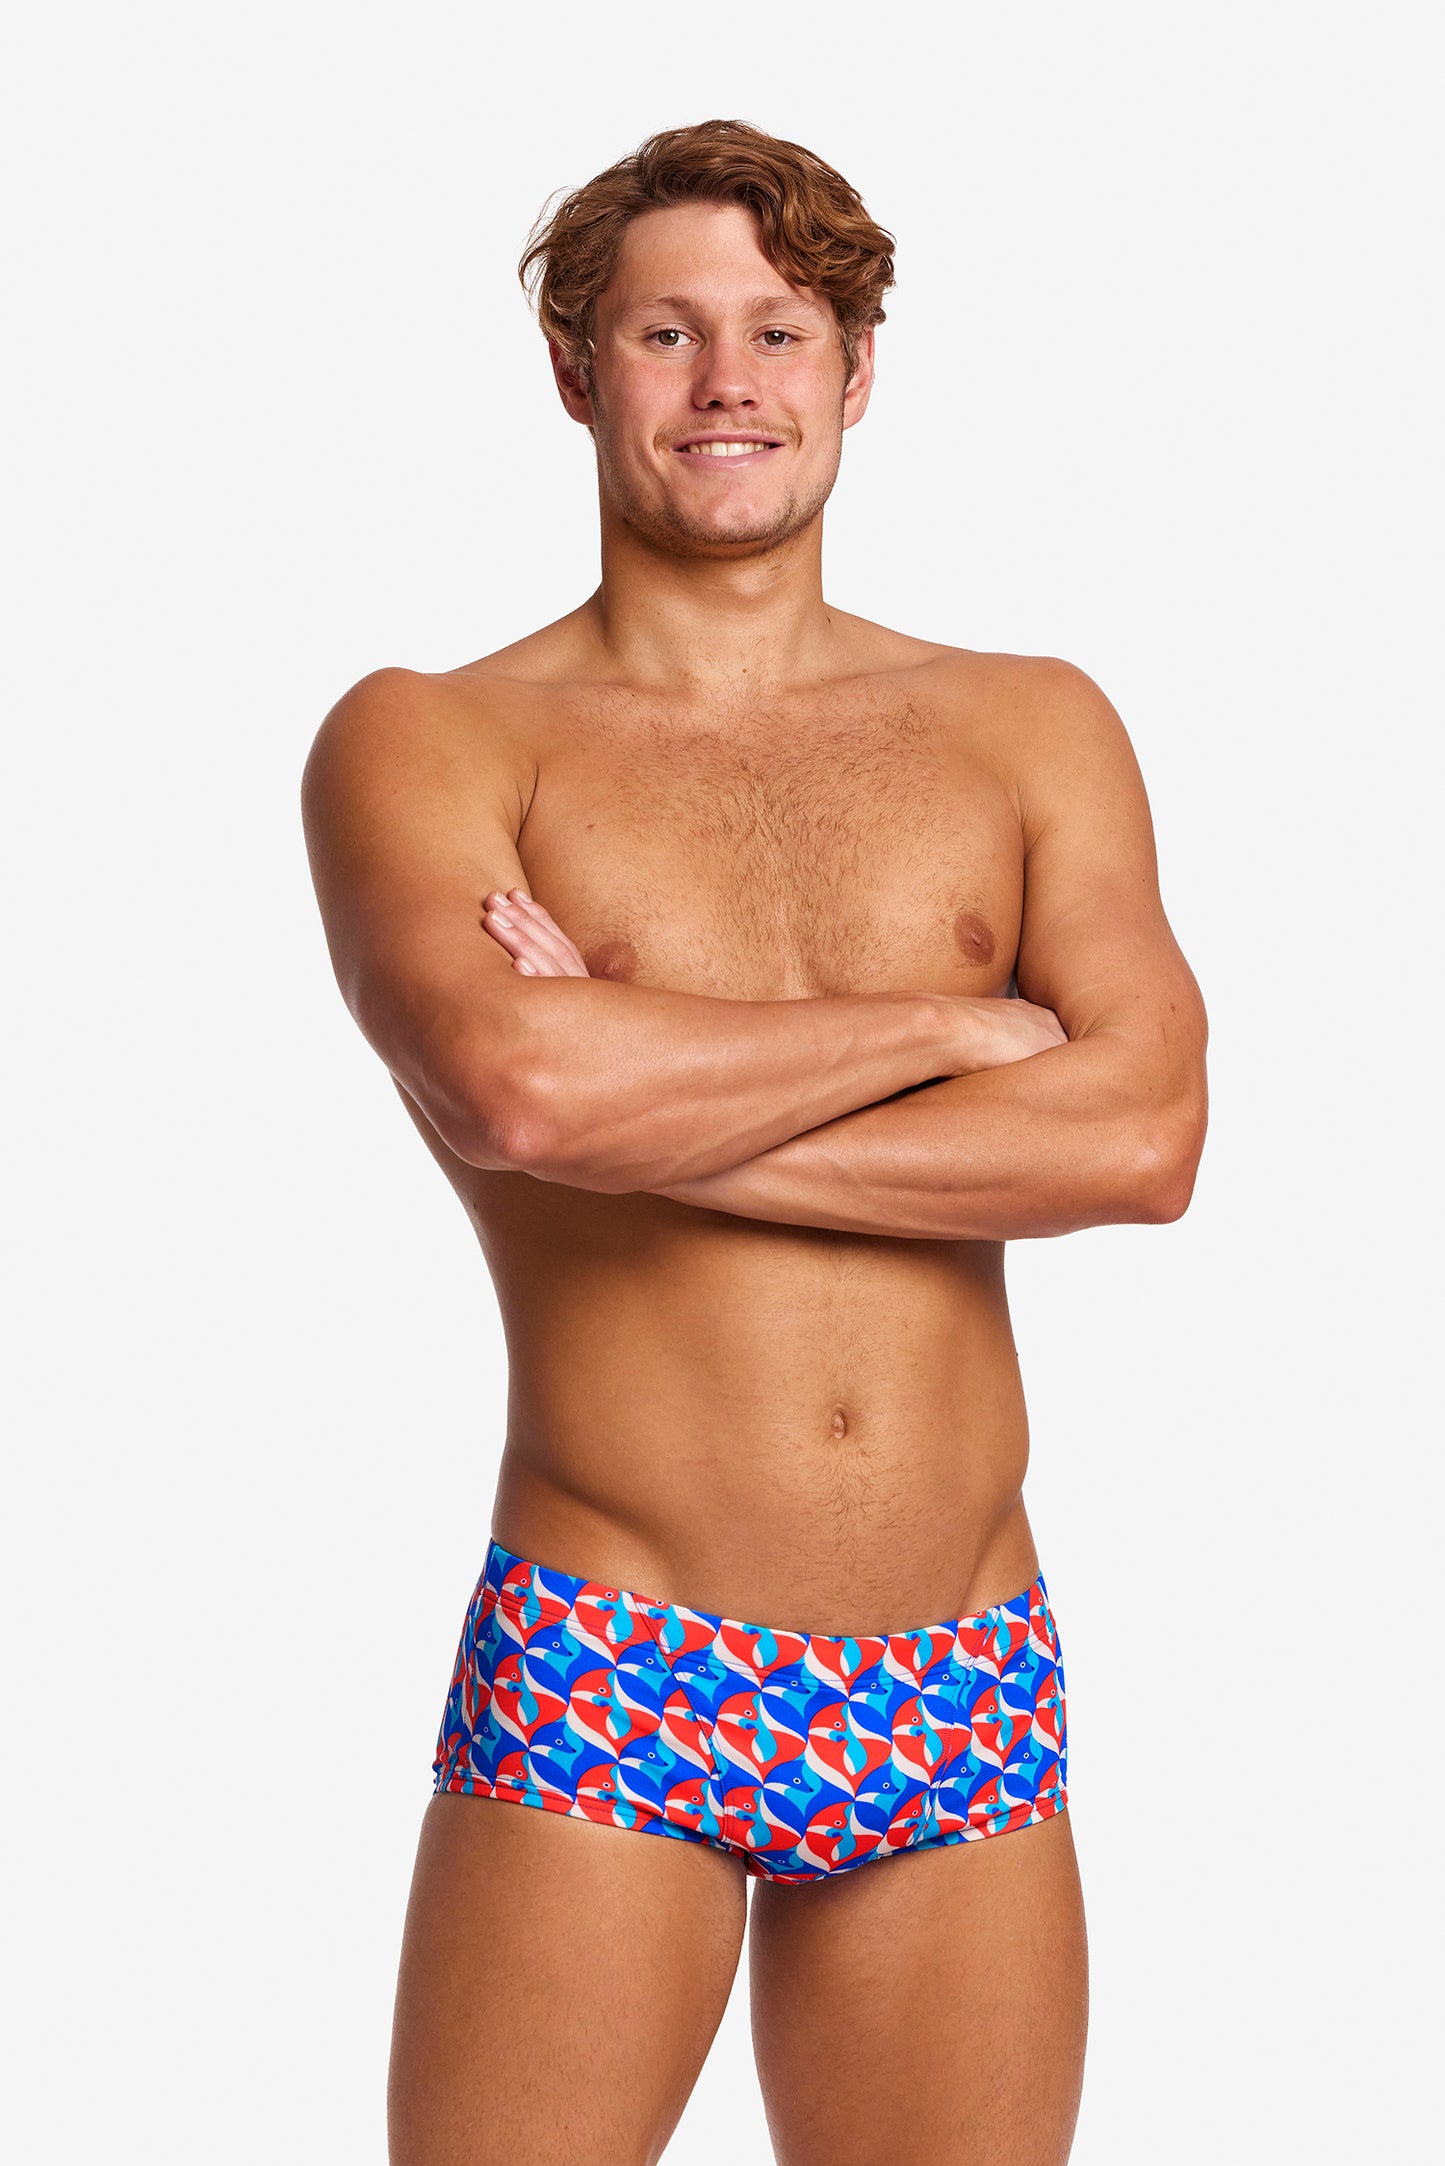 Funky Trunks Out Foxed Men’s Classic Trunks